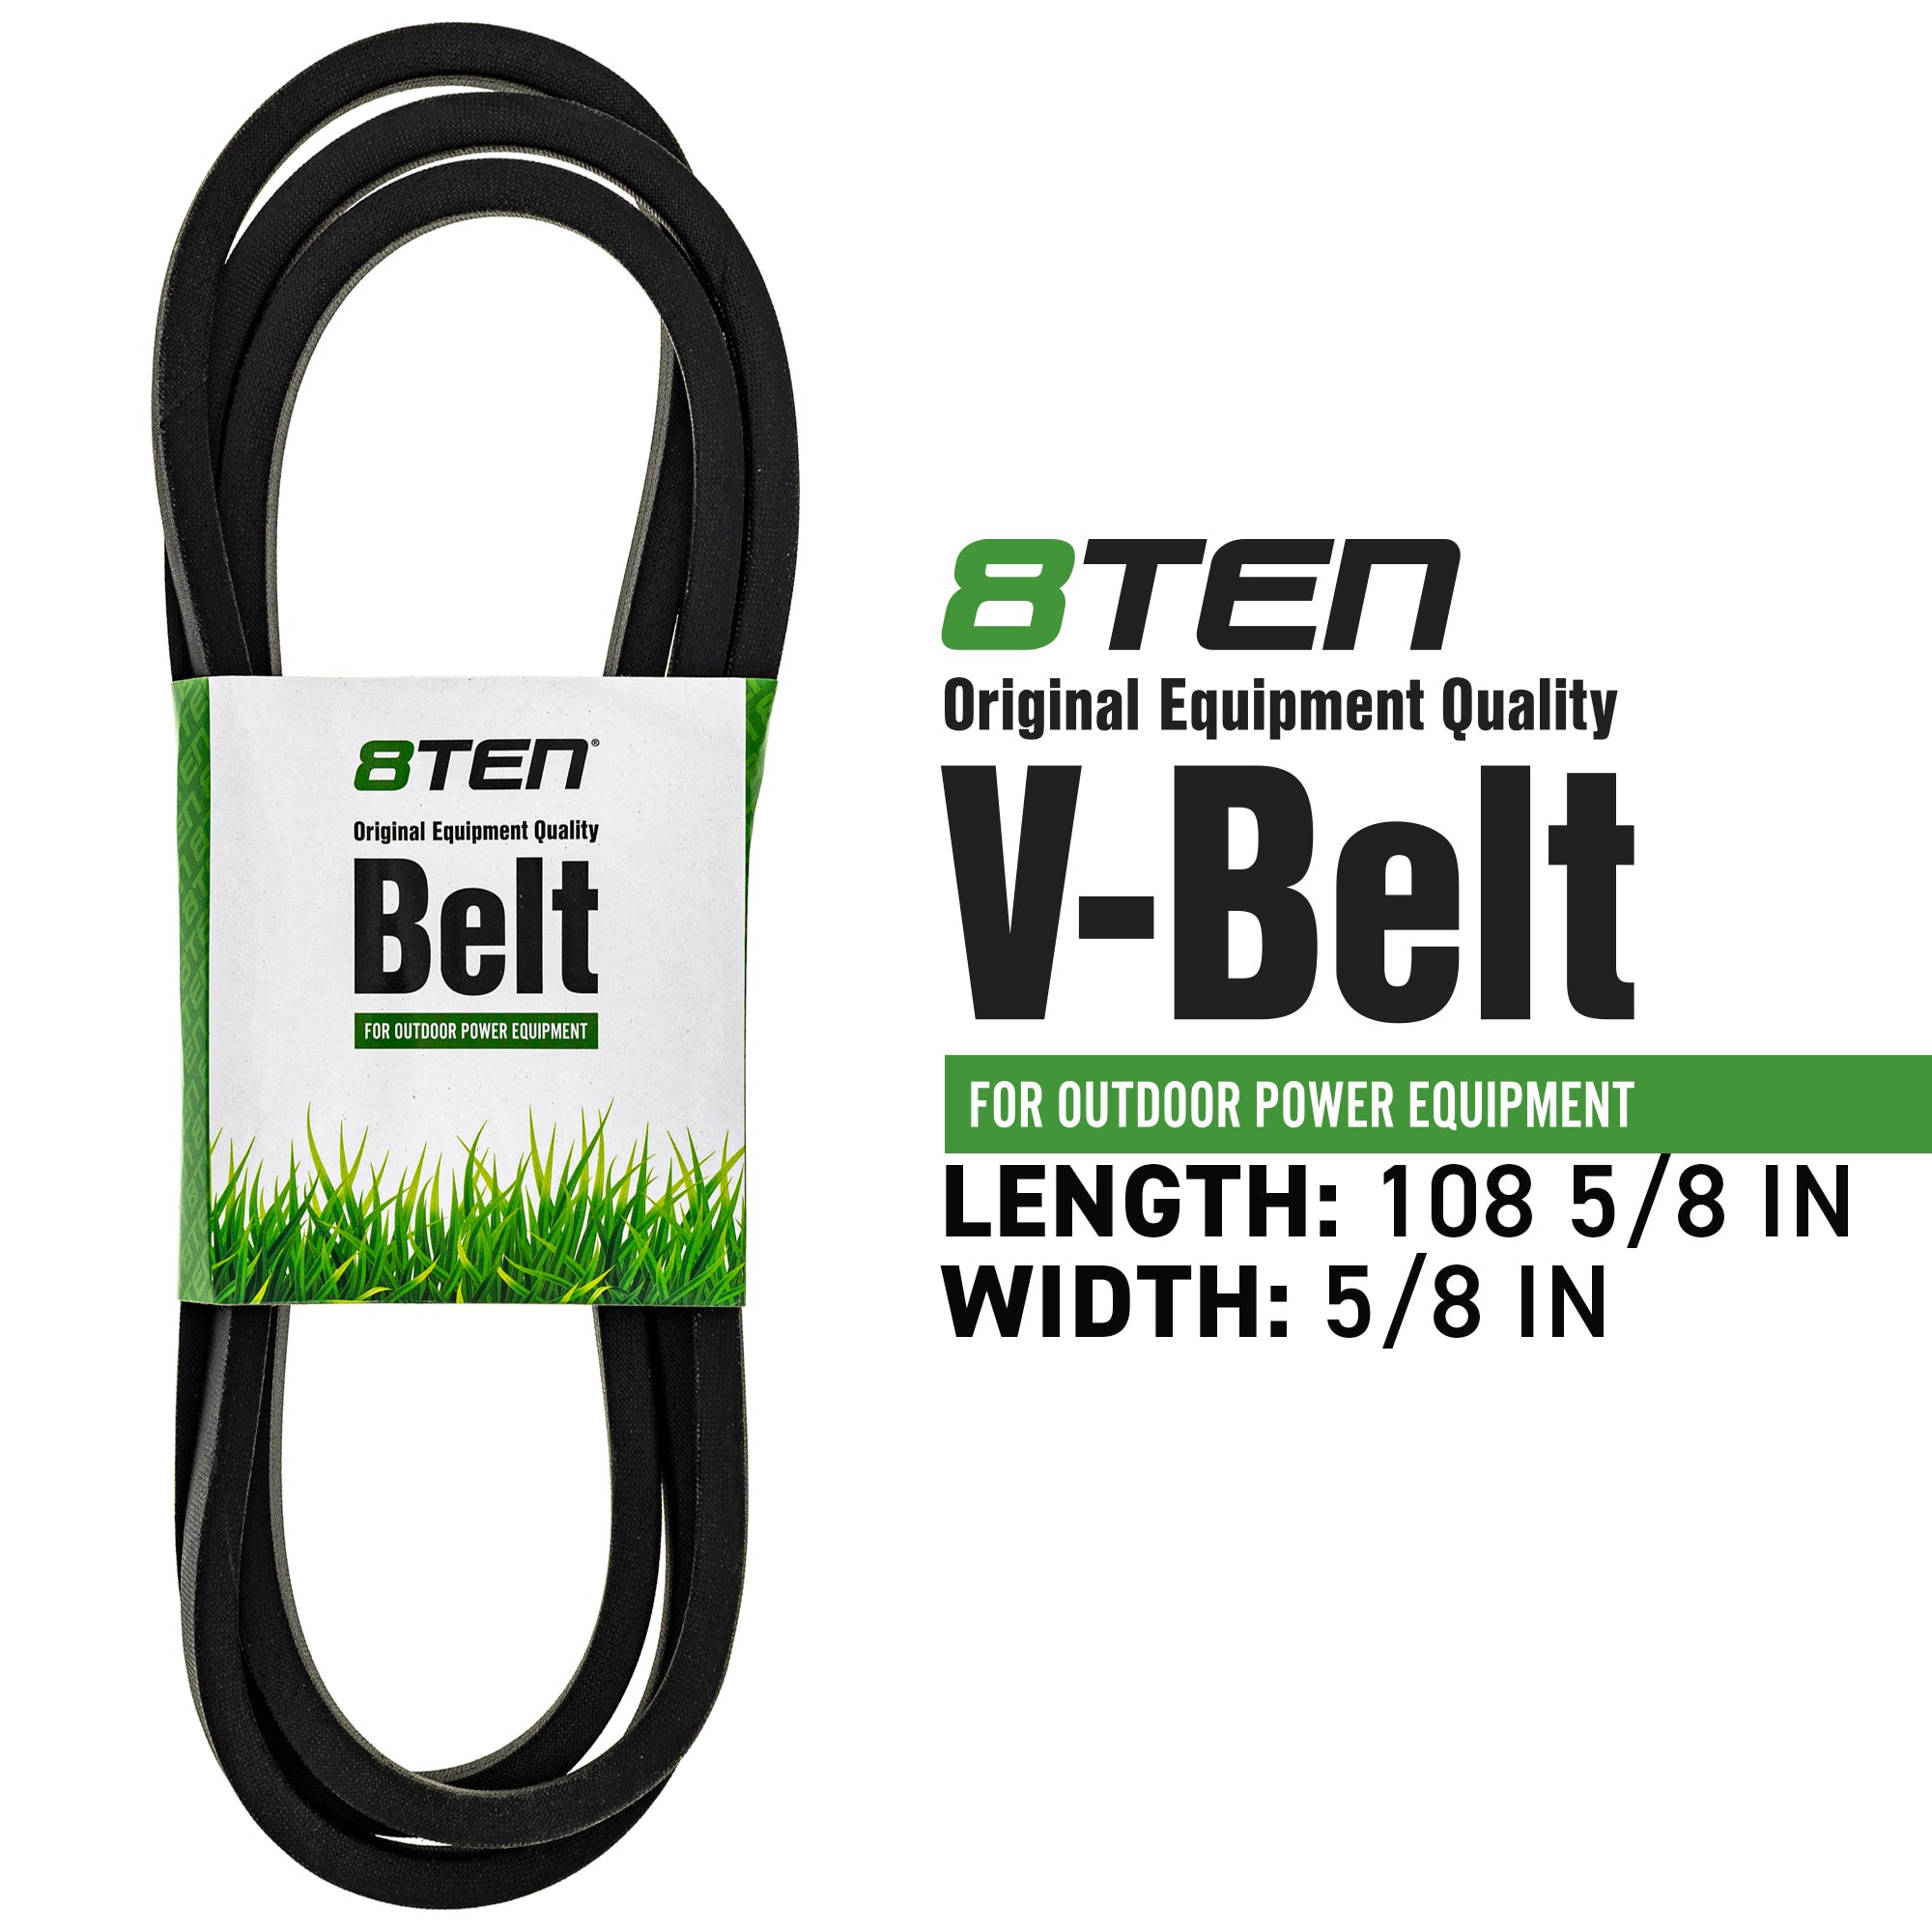 8TEN 810-CBL2746T Drive Belt for zOTHER Oregon Ariens Gravely Wasp